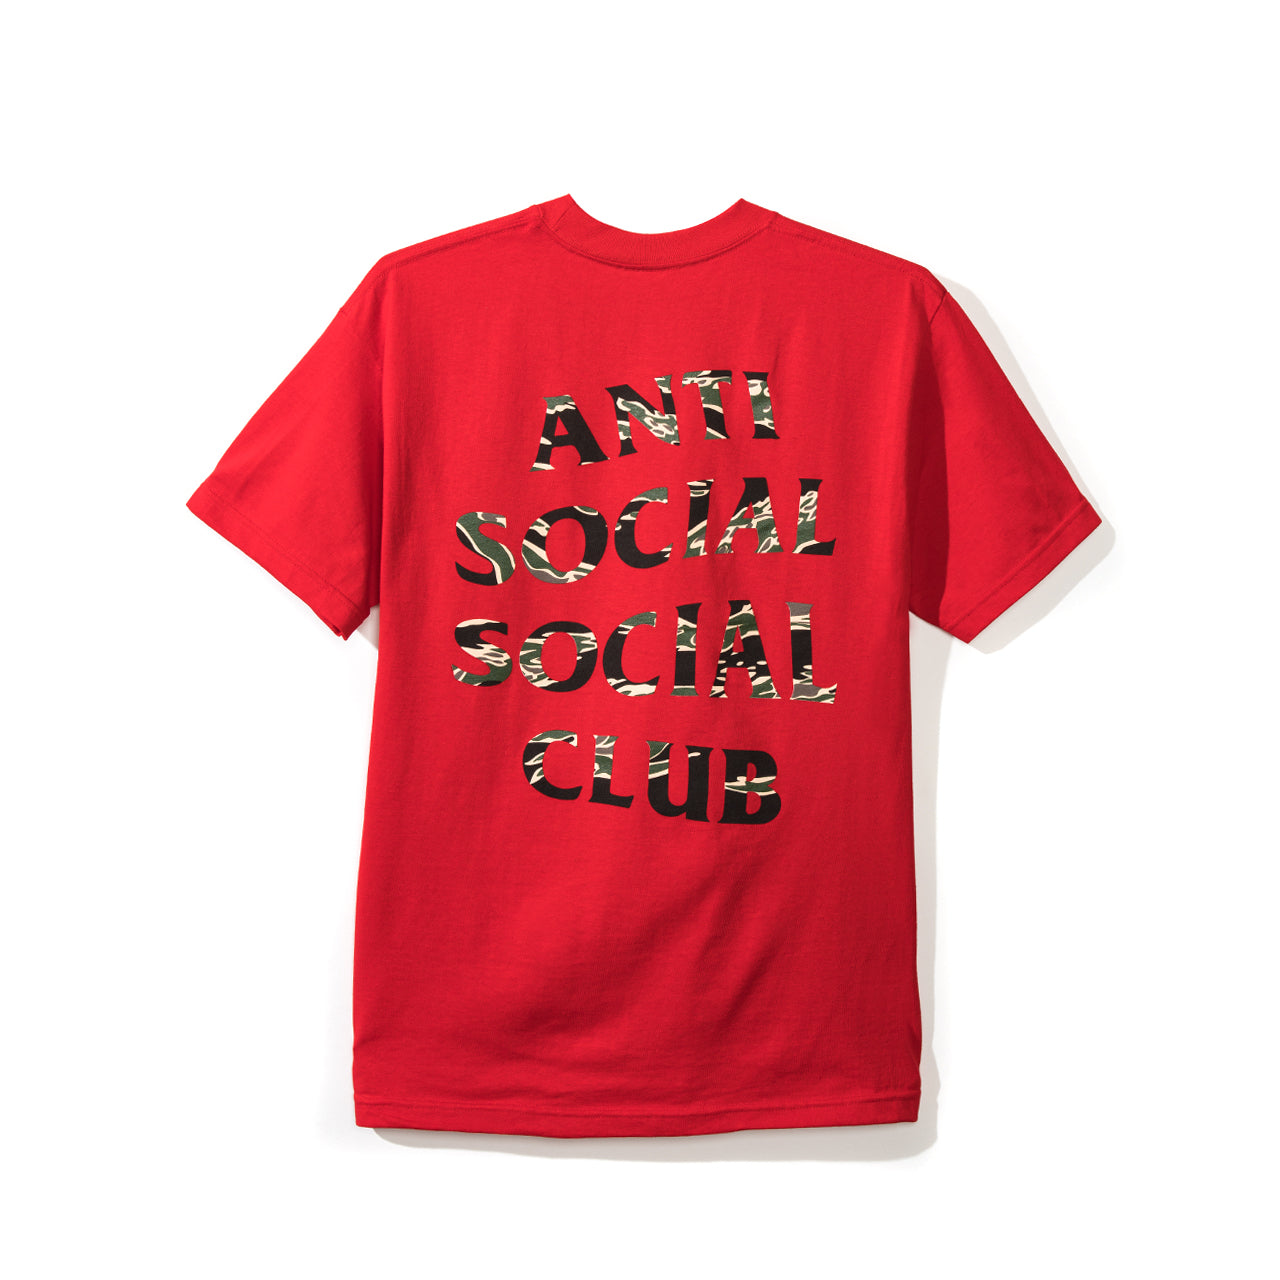 Mirage Red Tee